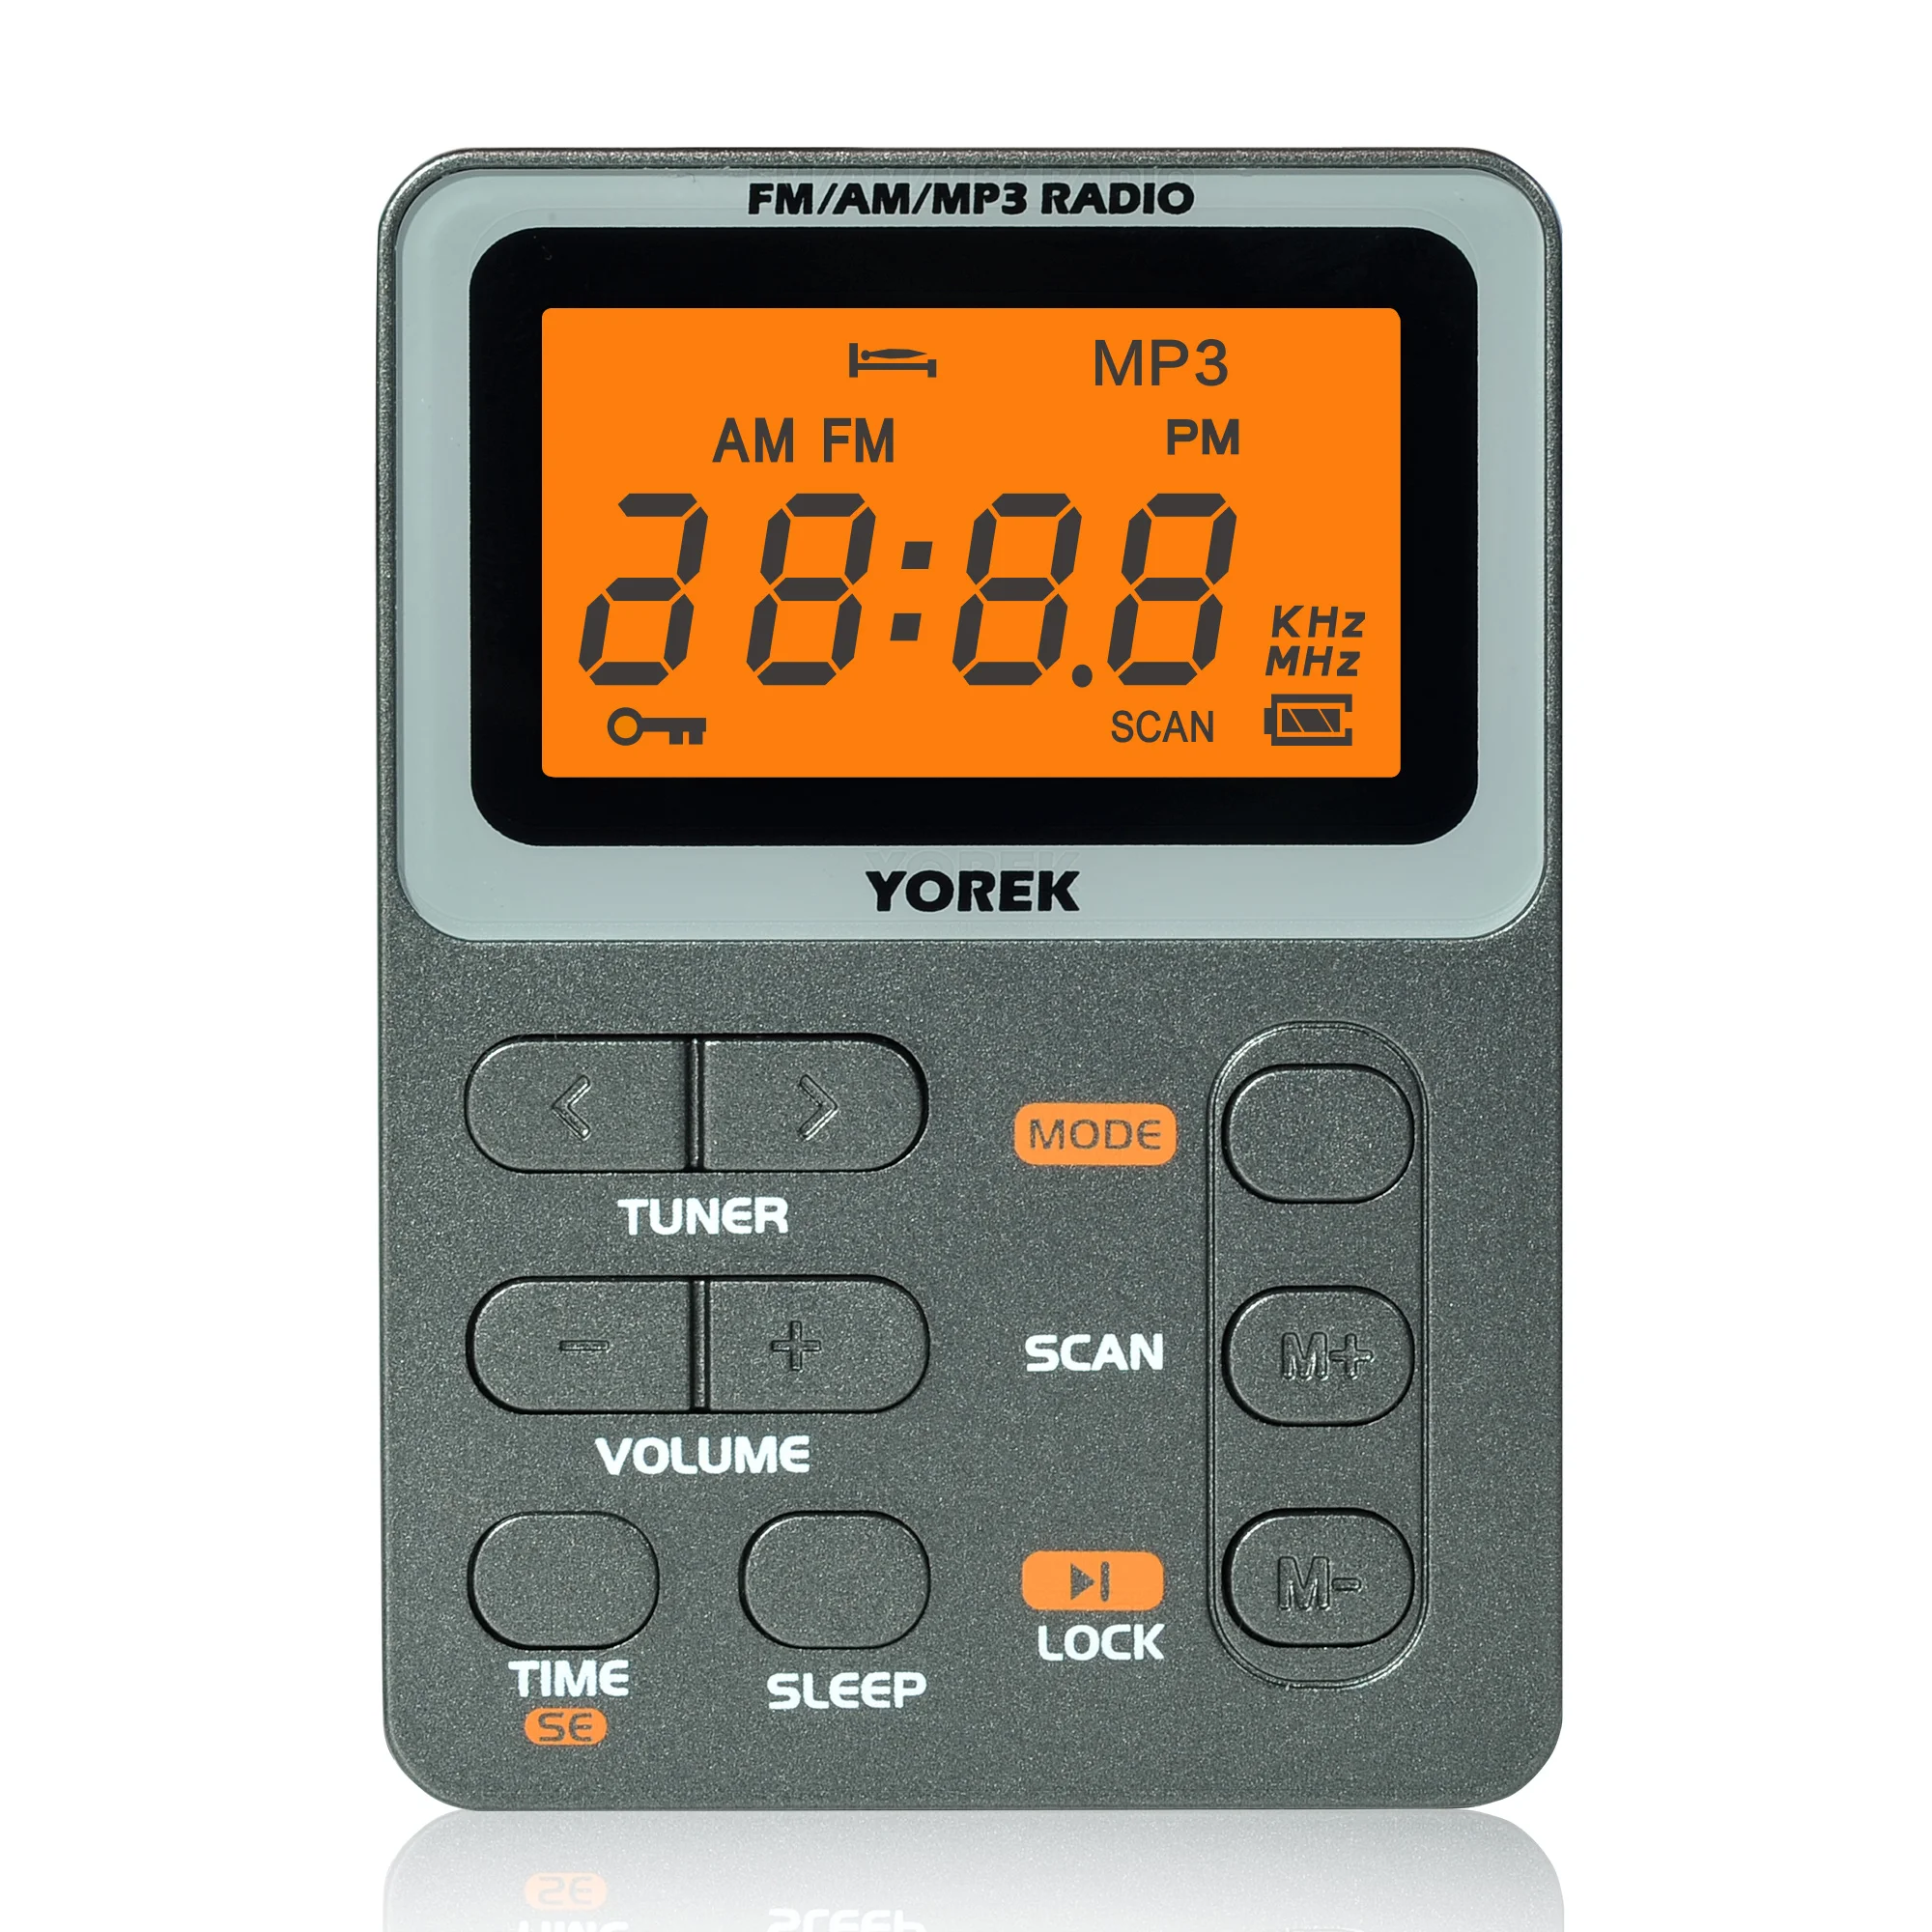 

2021 NEW Yorek Mini Pocket AM/FM Radio, Best Reception, Rechargeable Portable Radio with Earphone, MP3 Player Support TF Card